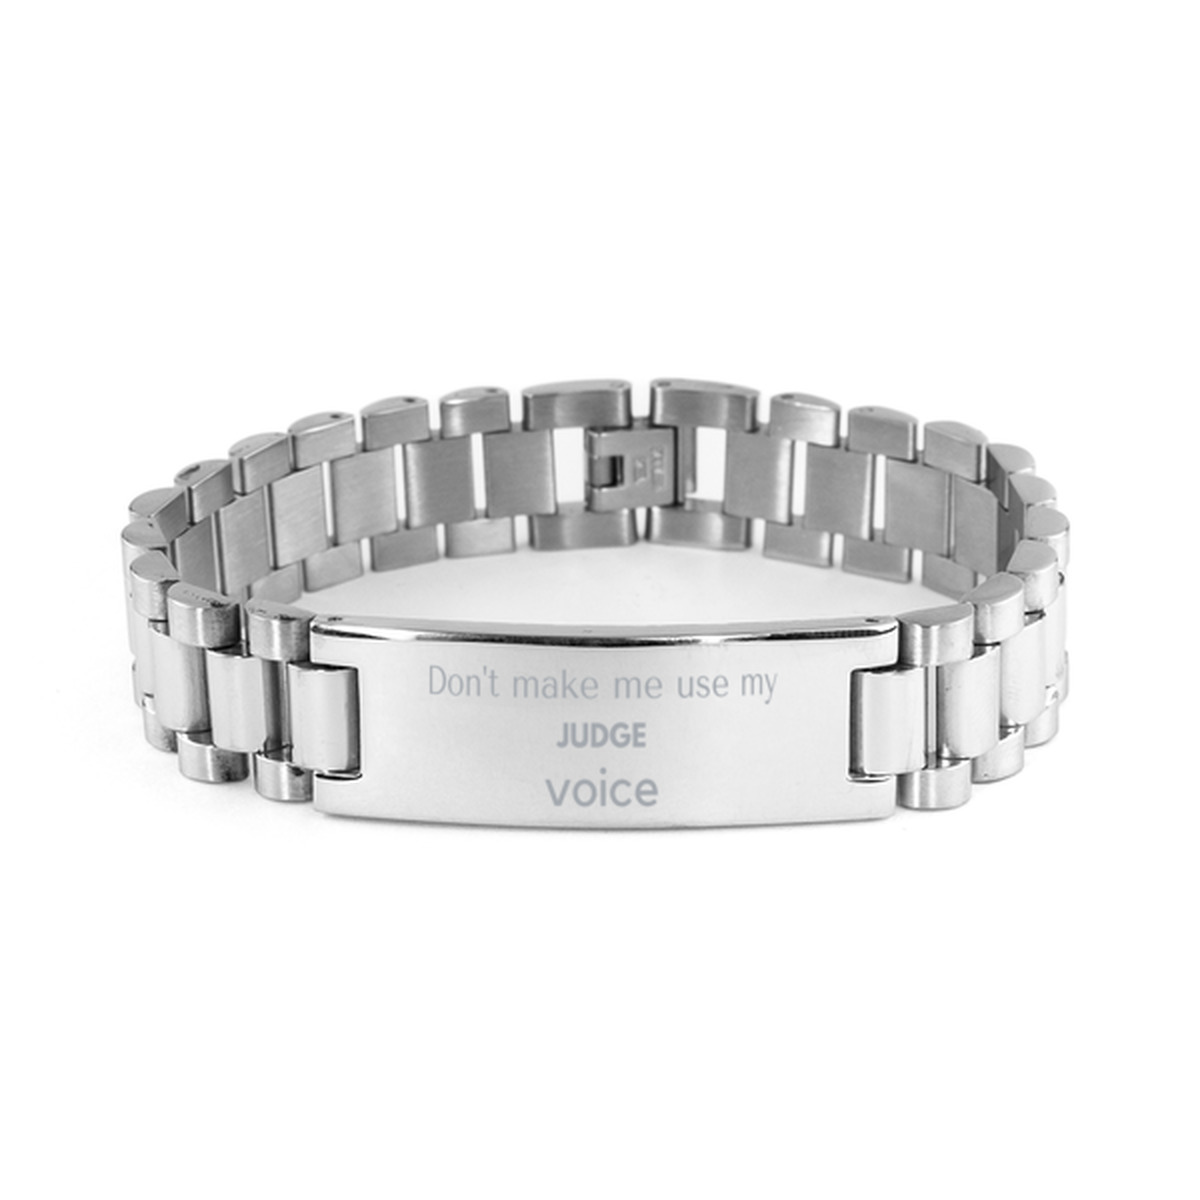 Don't make me use my Judge voice, Sarcasm Judge Gifts, Christmas Judge Ladder Stainless Steel Bracelet Birthday Unique Gifts For Judge Coworkers, Men, Women, Colleague, Friends